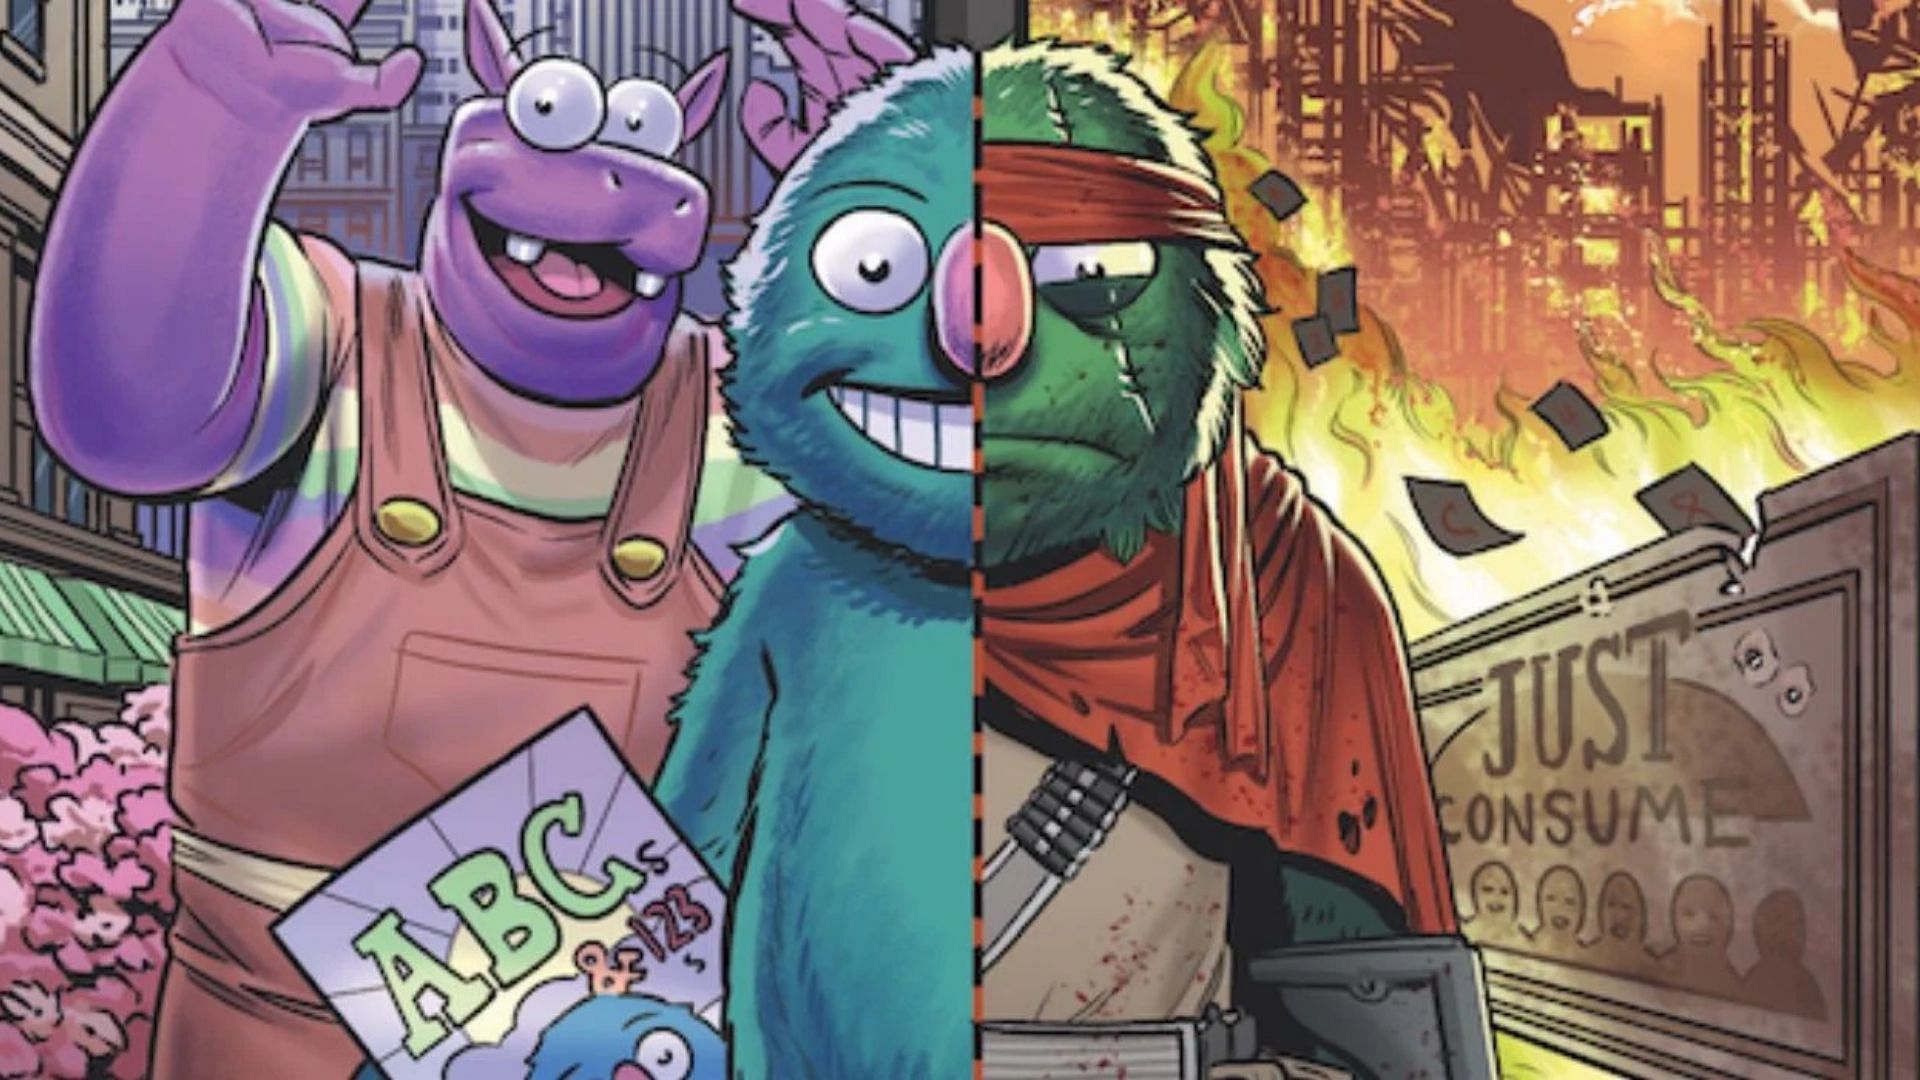 Sesame Street turns dark in this version by Rick and Morty writers (Image via Dark Horse)